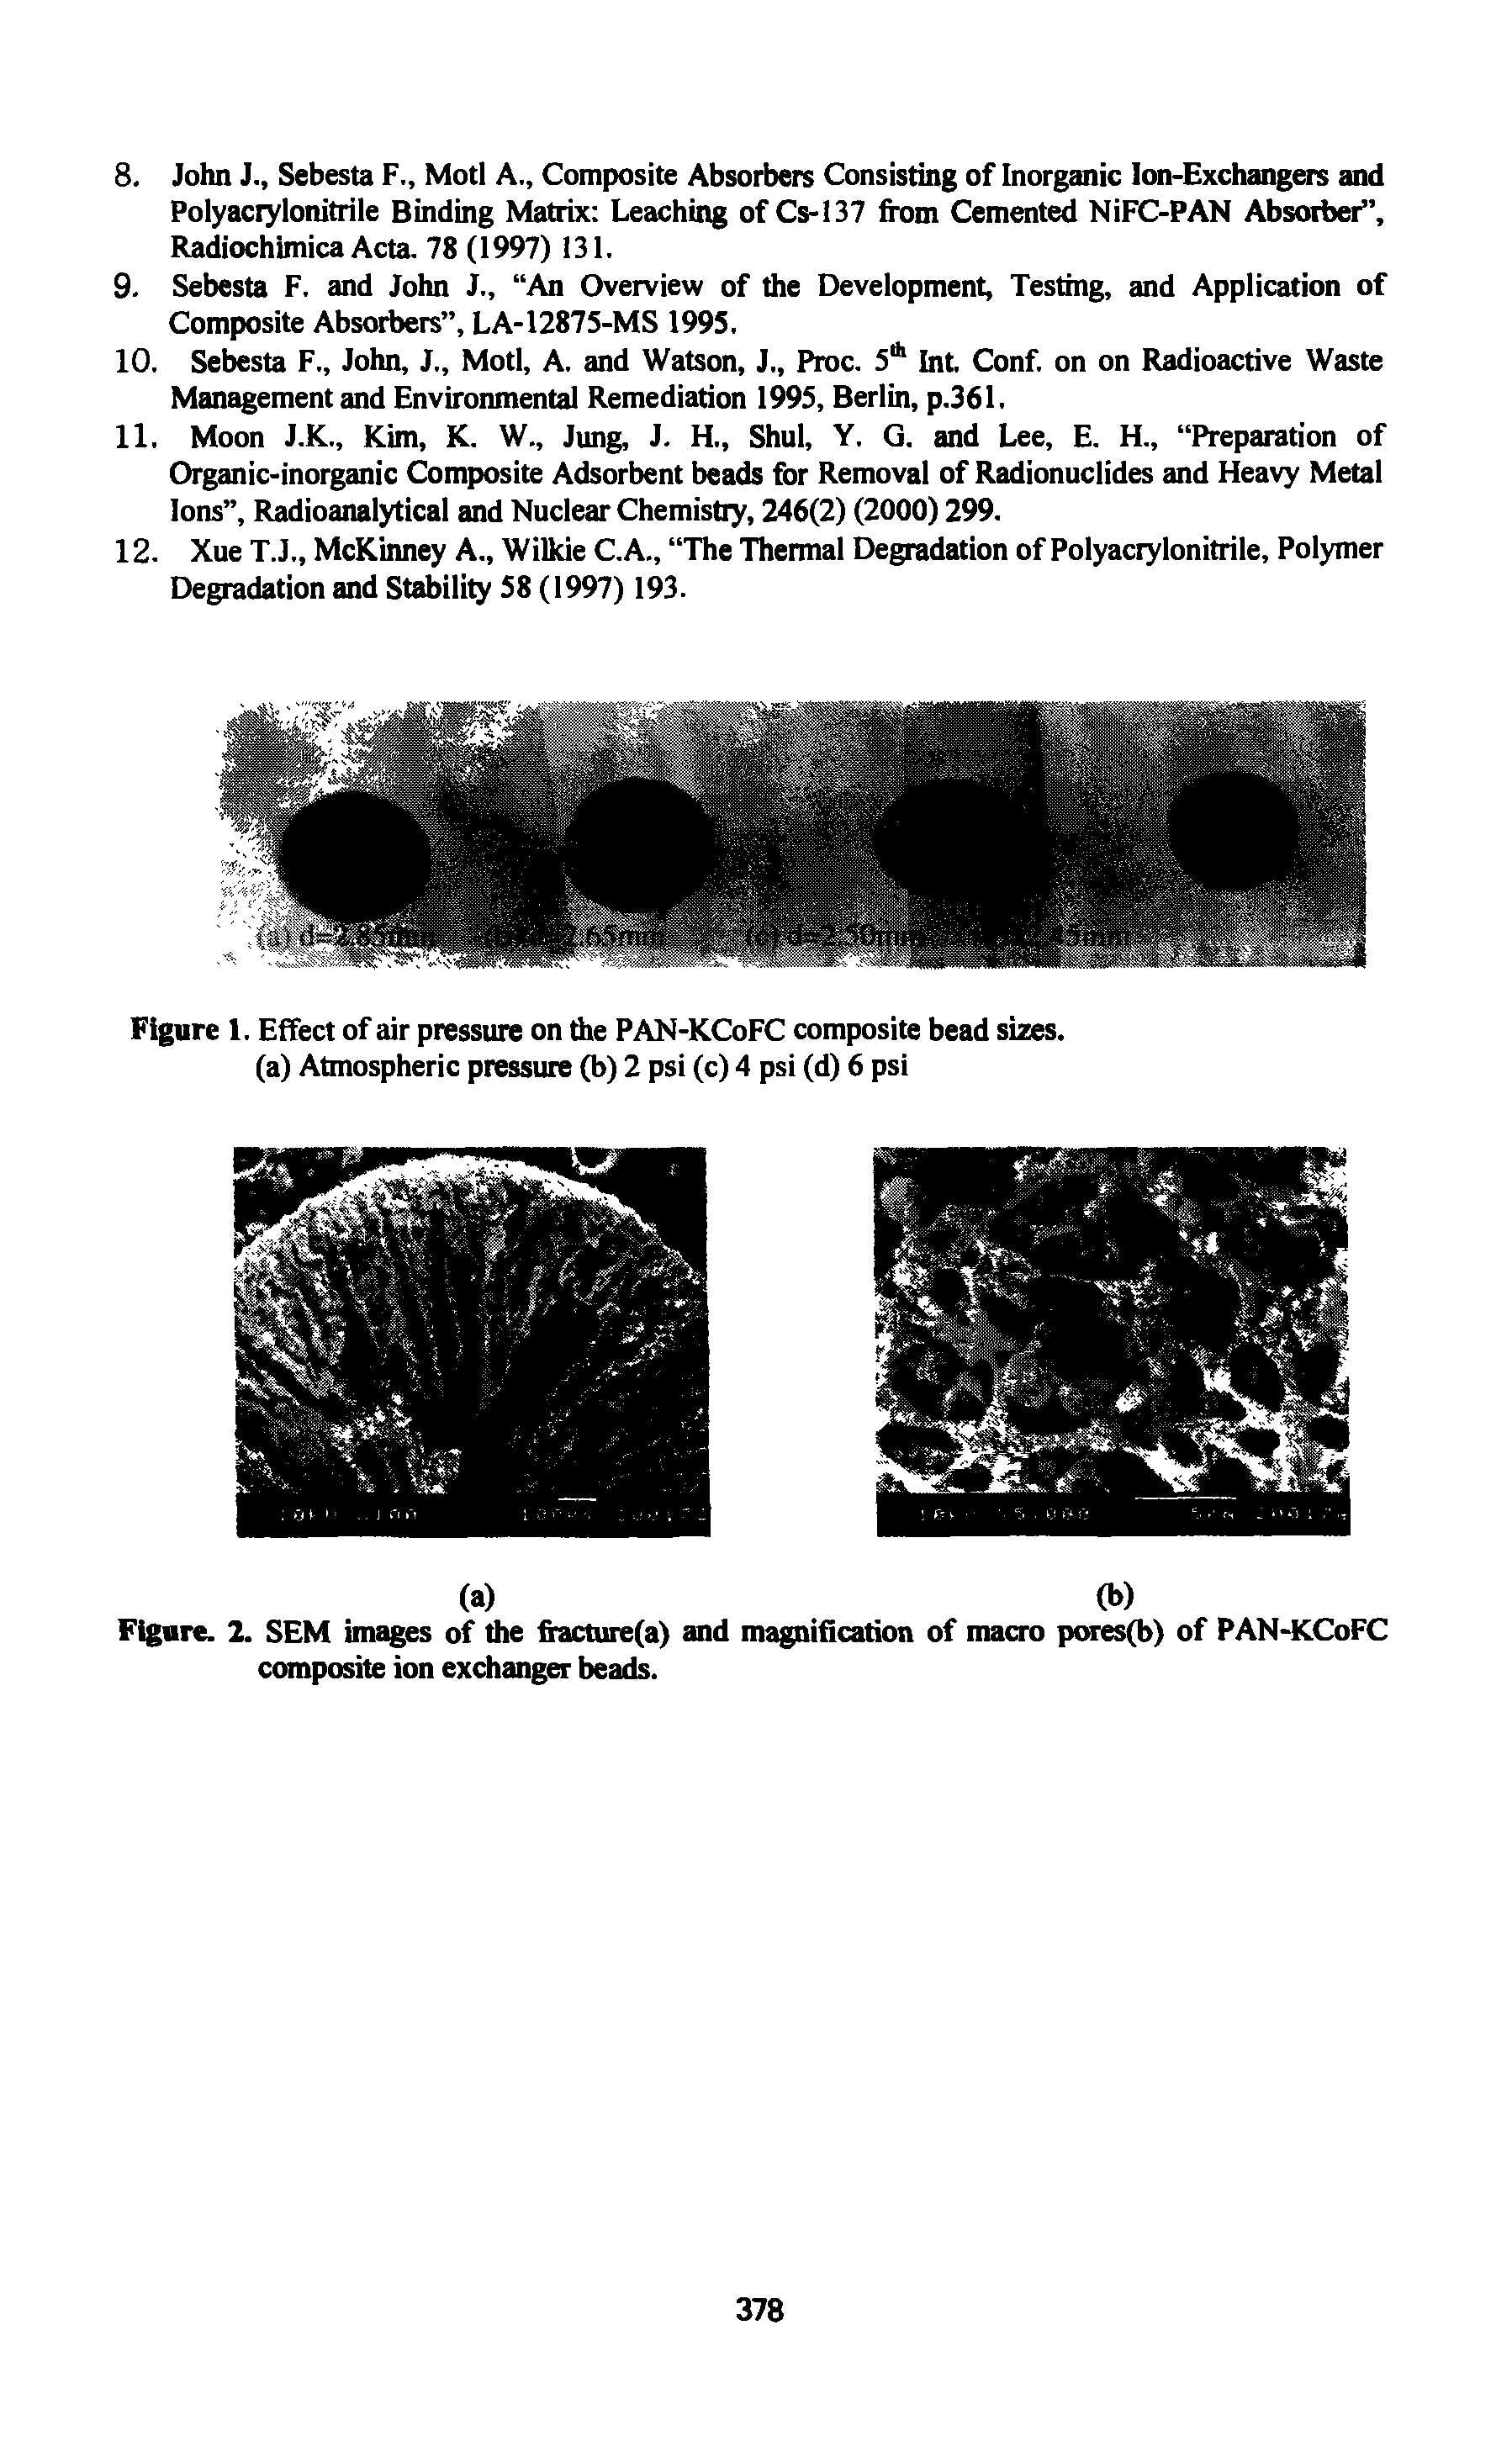 Figure. 2. SEM images of the fracture(a) and magnification of macro pores(b) of PAN-KCoFC composite ion exchanger beads.